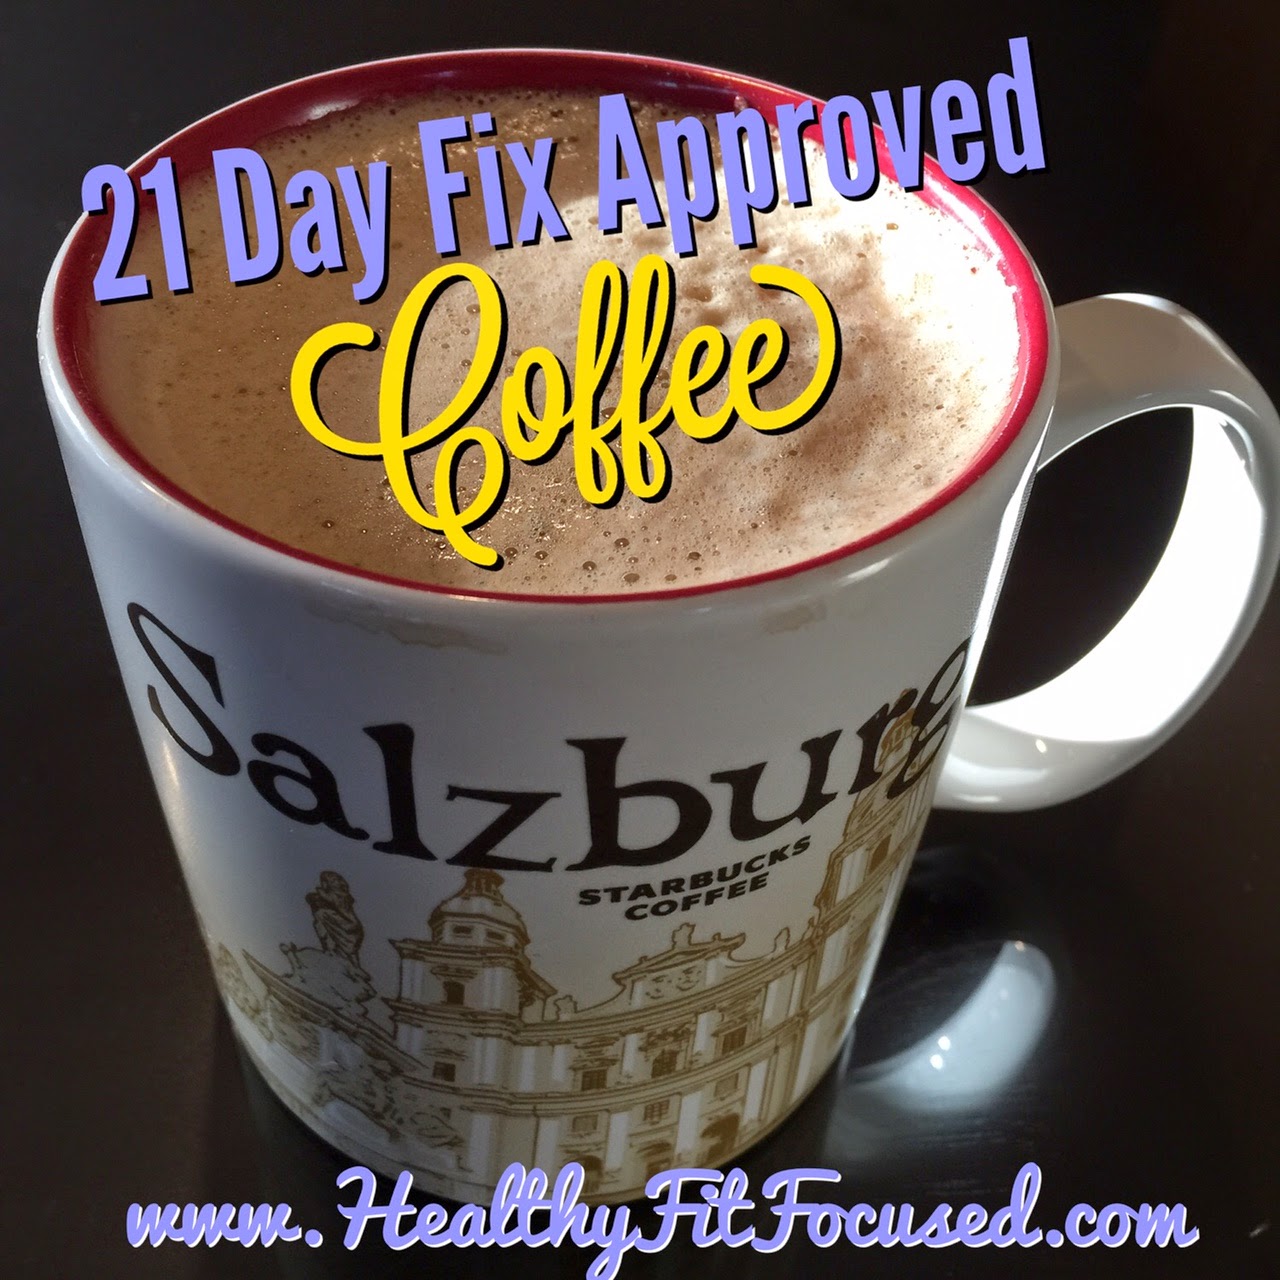 21 Day Fix Approved Coffee, clean eating, The Best Coffee Ever... www.HealthyFitFocused.com 